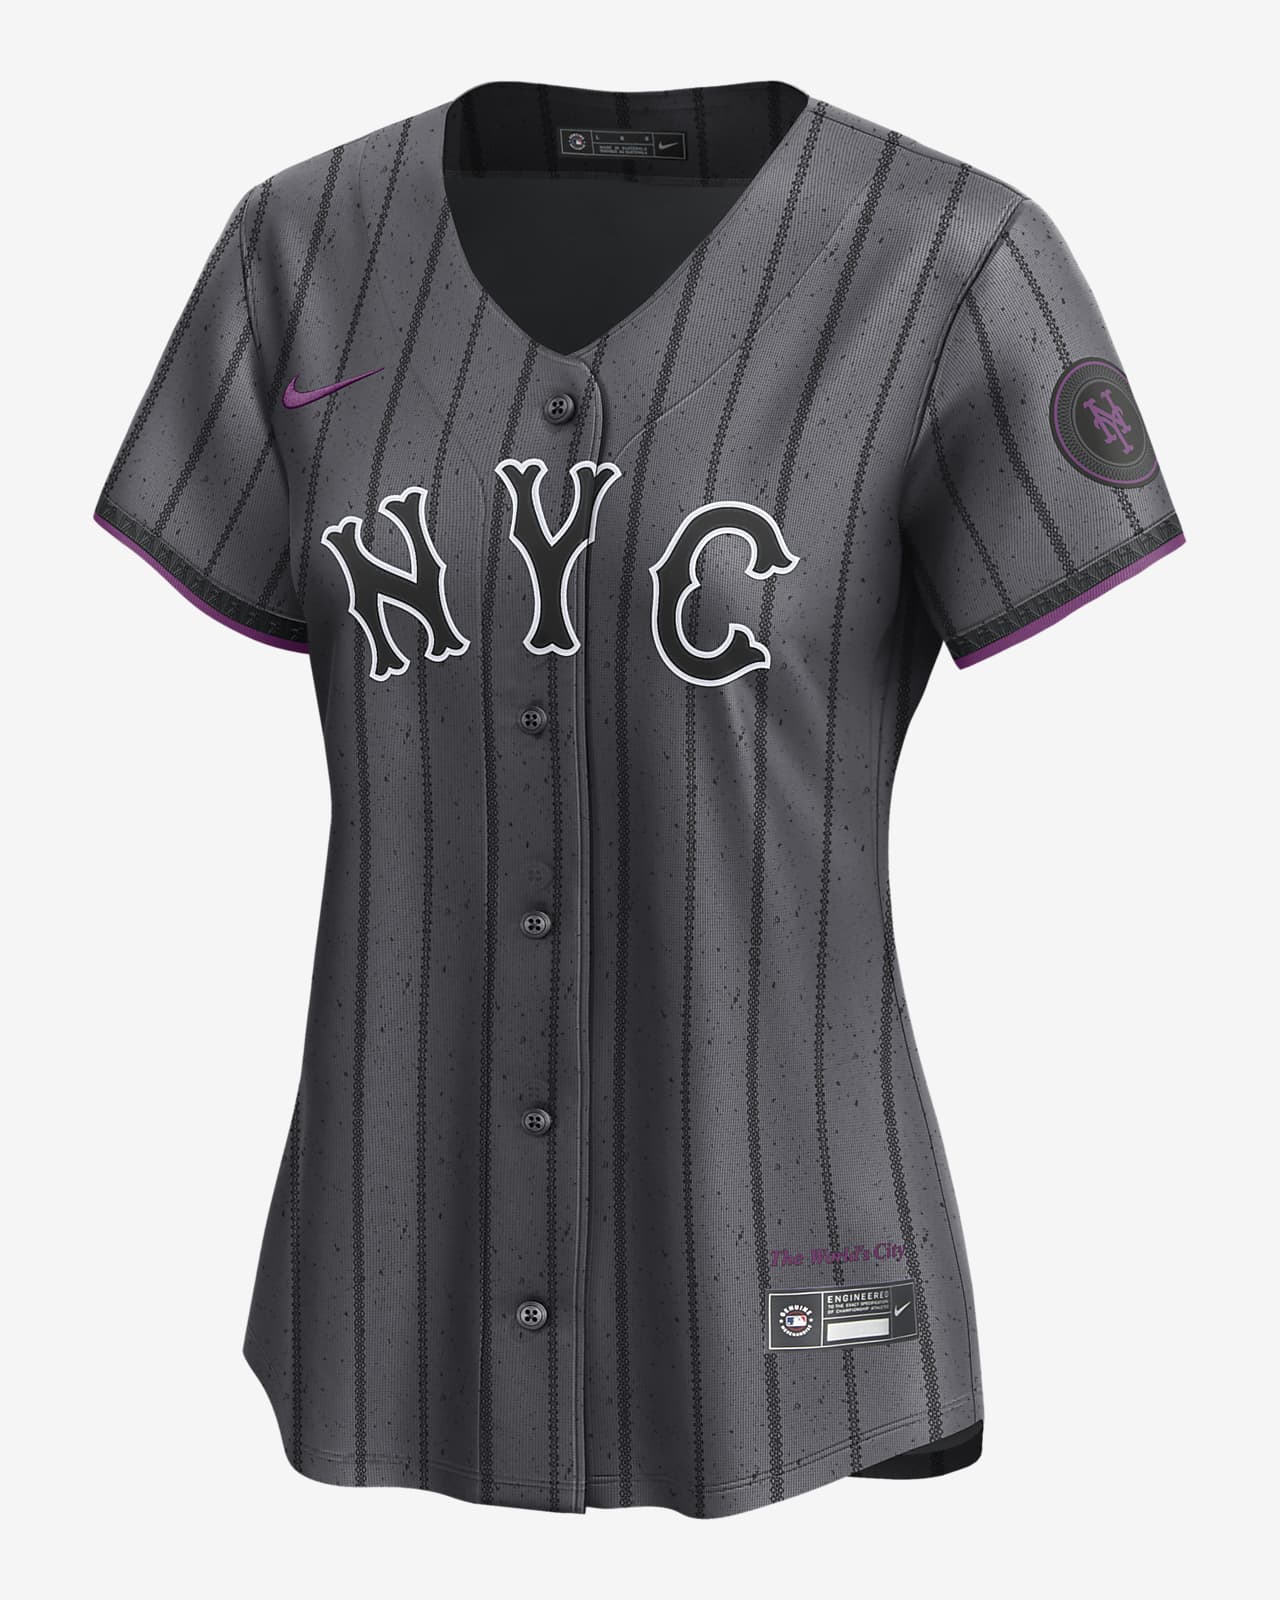 Pete Alonso New York Mets City Connect Women's Nike Dri-FIT ADV MLB Limited Jersey